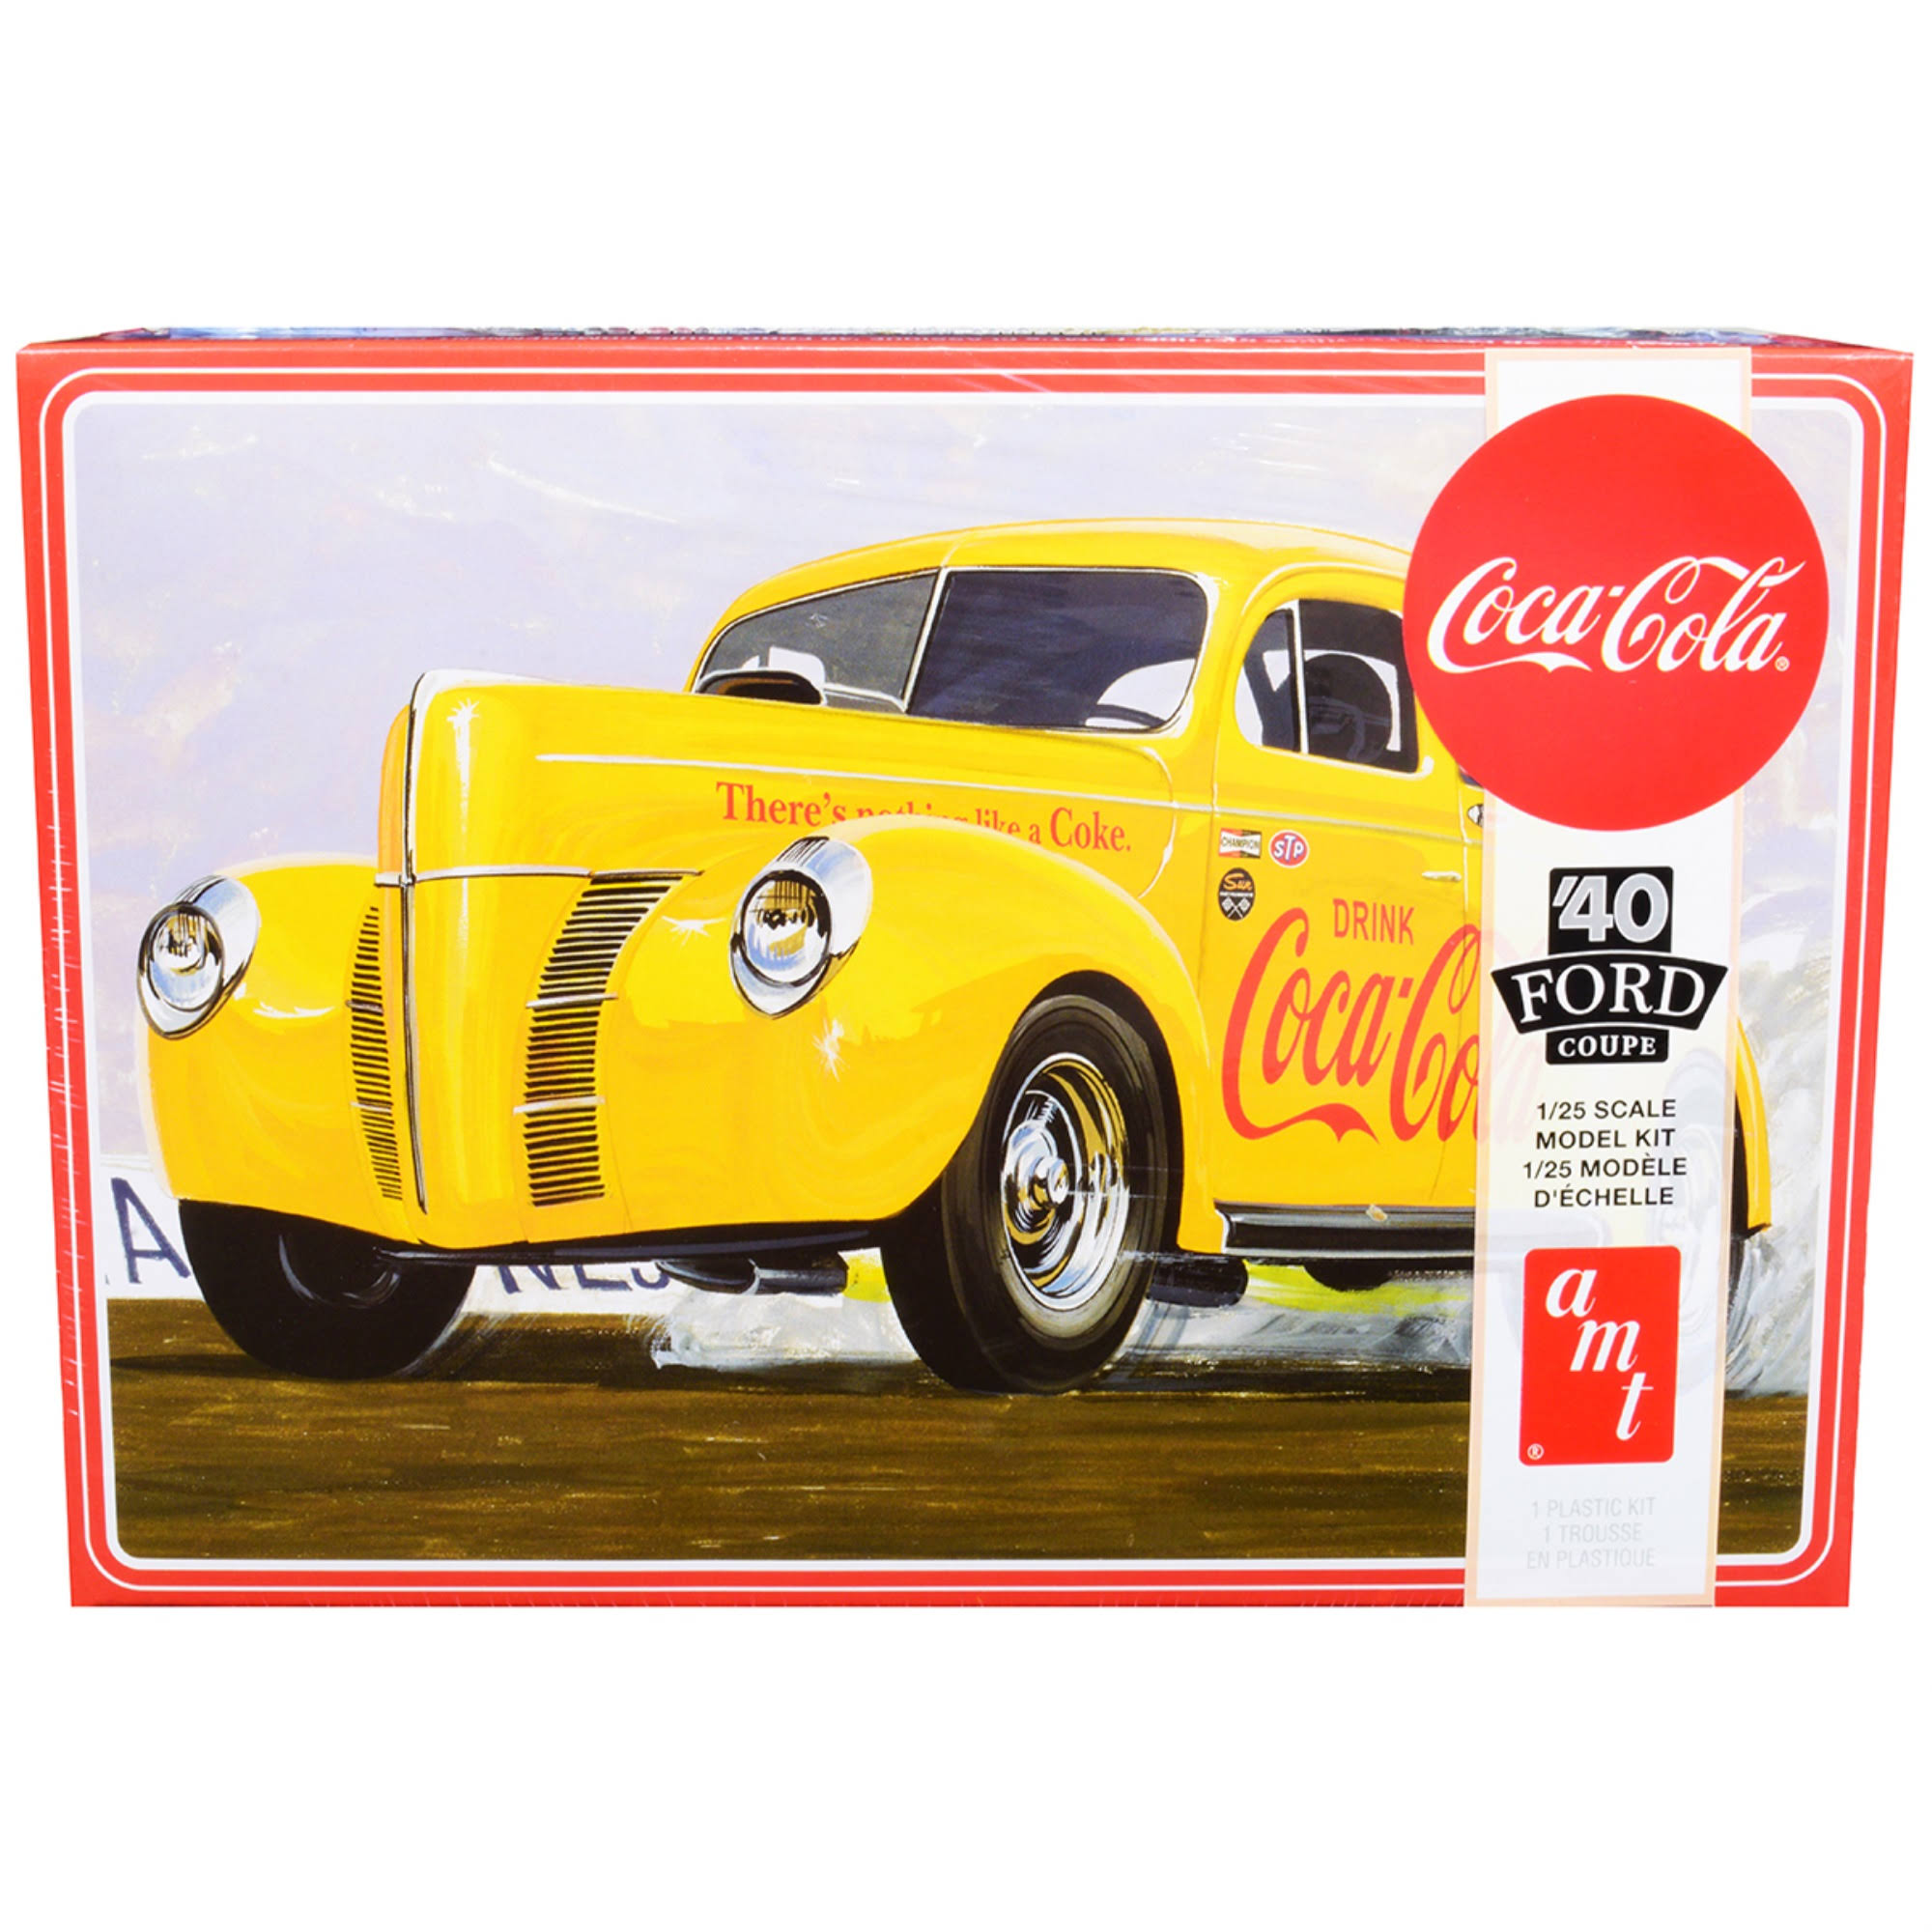 AMT 1940 Ford Coupe Coca Cola 1:25 scale model car kit 1346